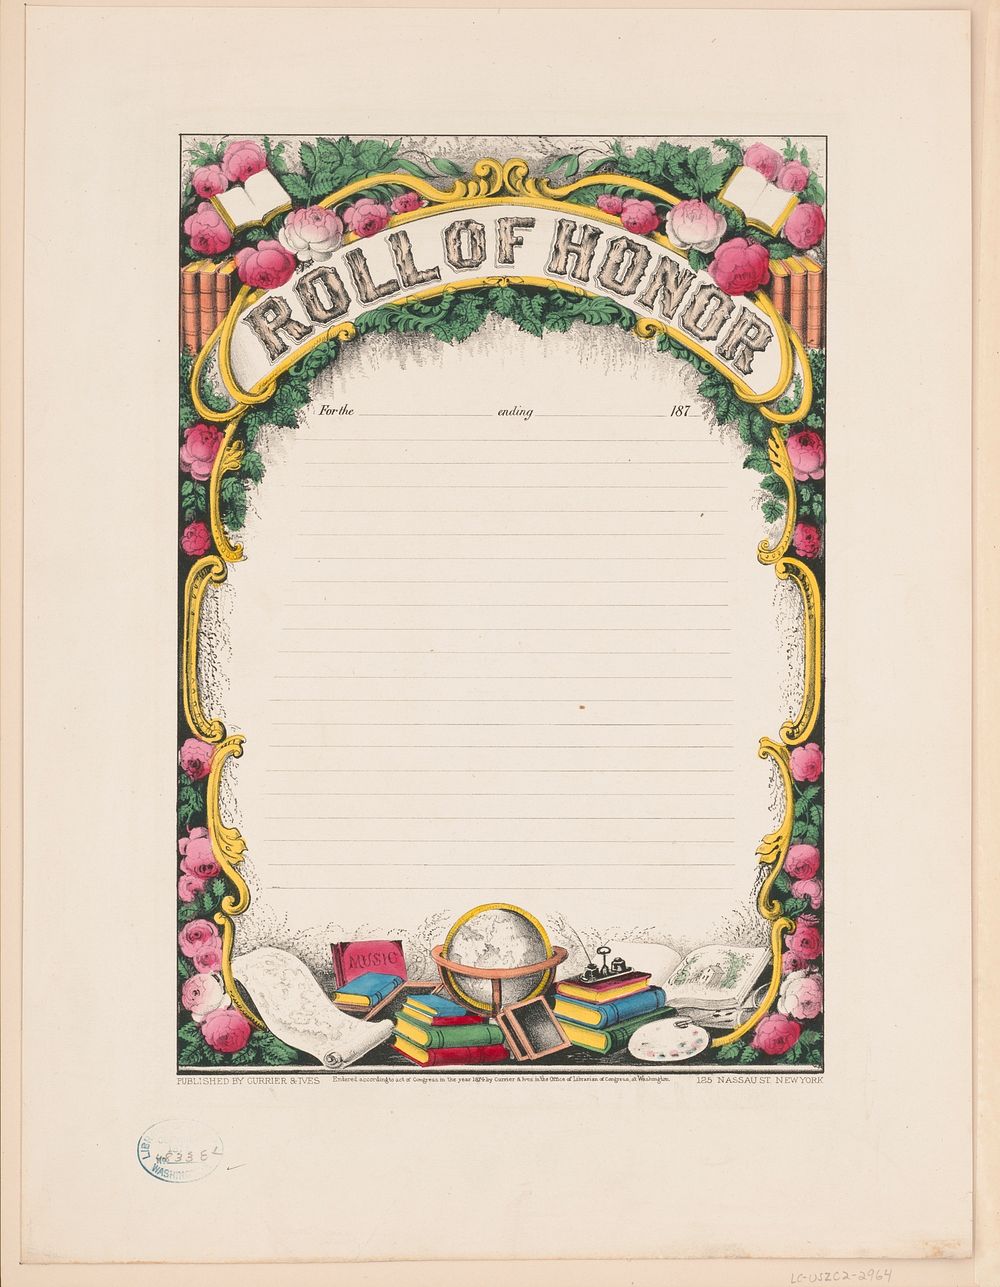 Roll of Honor (1874) by Currier & Ives